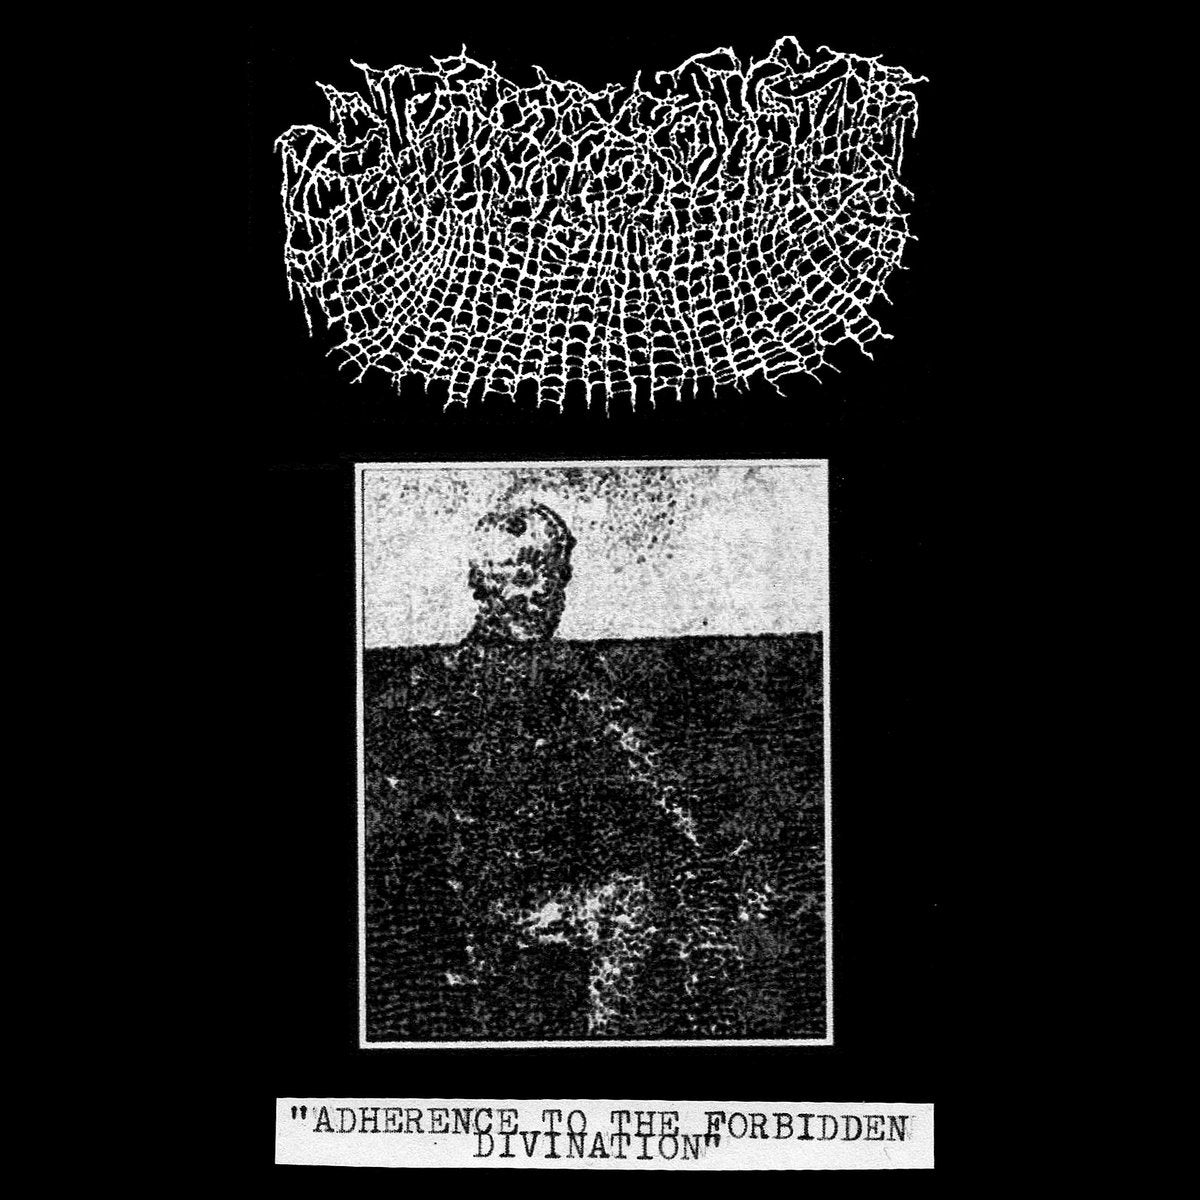 (CB001) Odious Hiss (UK) - Adherence To The Forbidden Divination